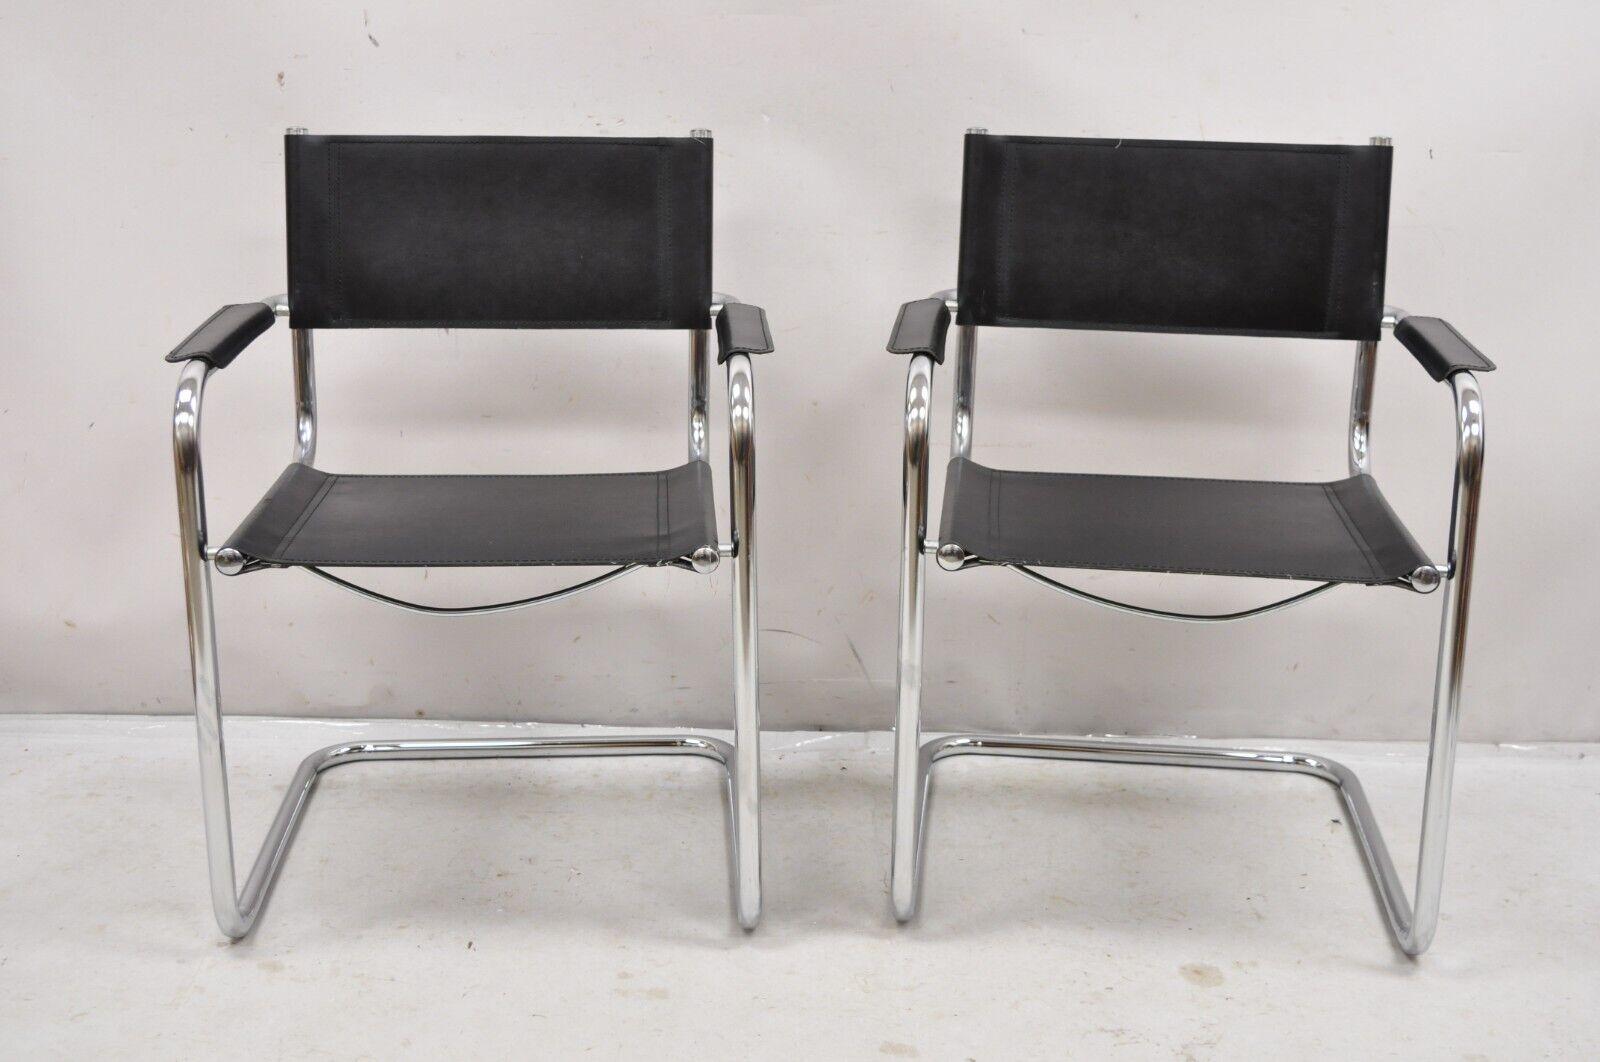 Vintage Italian Model S34 Arm Chair in the Manner of Mart Stam for Cesca in Black Leather and Chrome Steel - a Pair. Circa  Mid to Late 20th Century. Measurements: 32